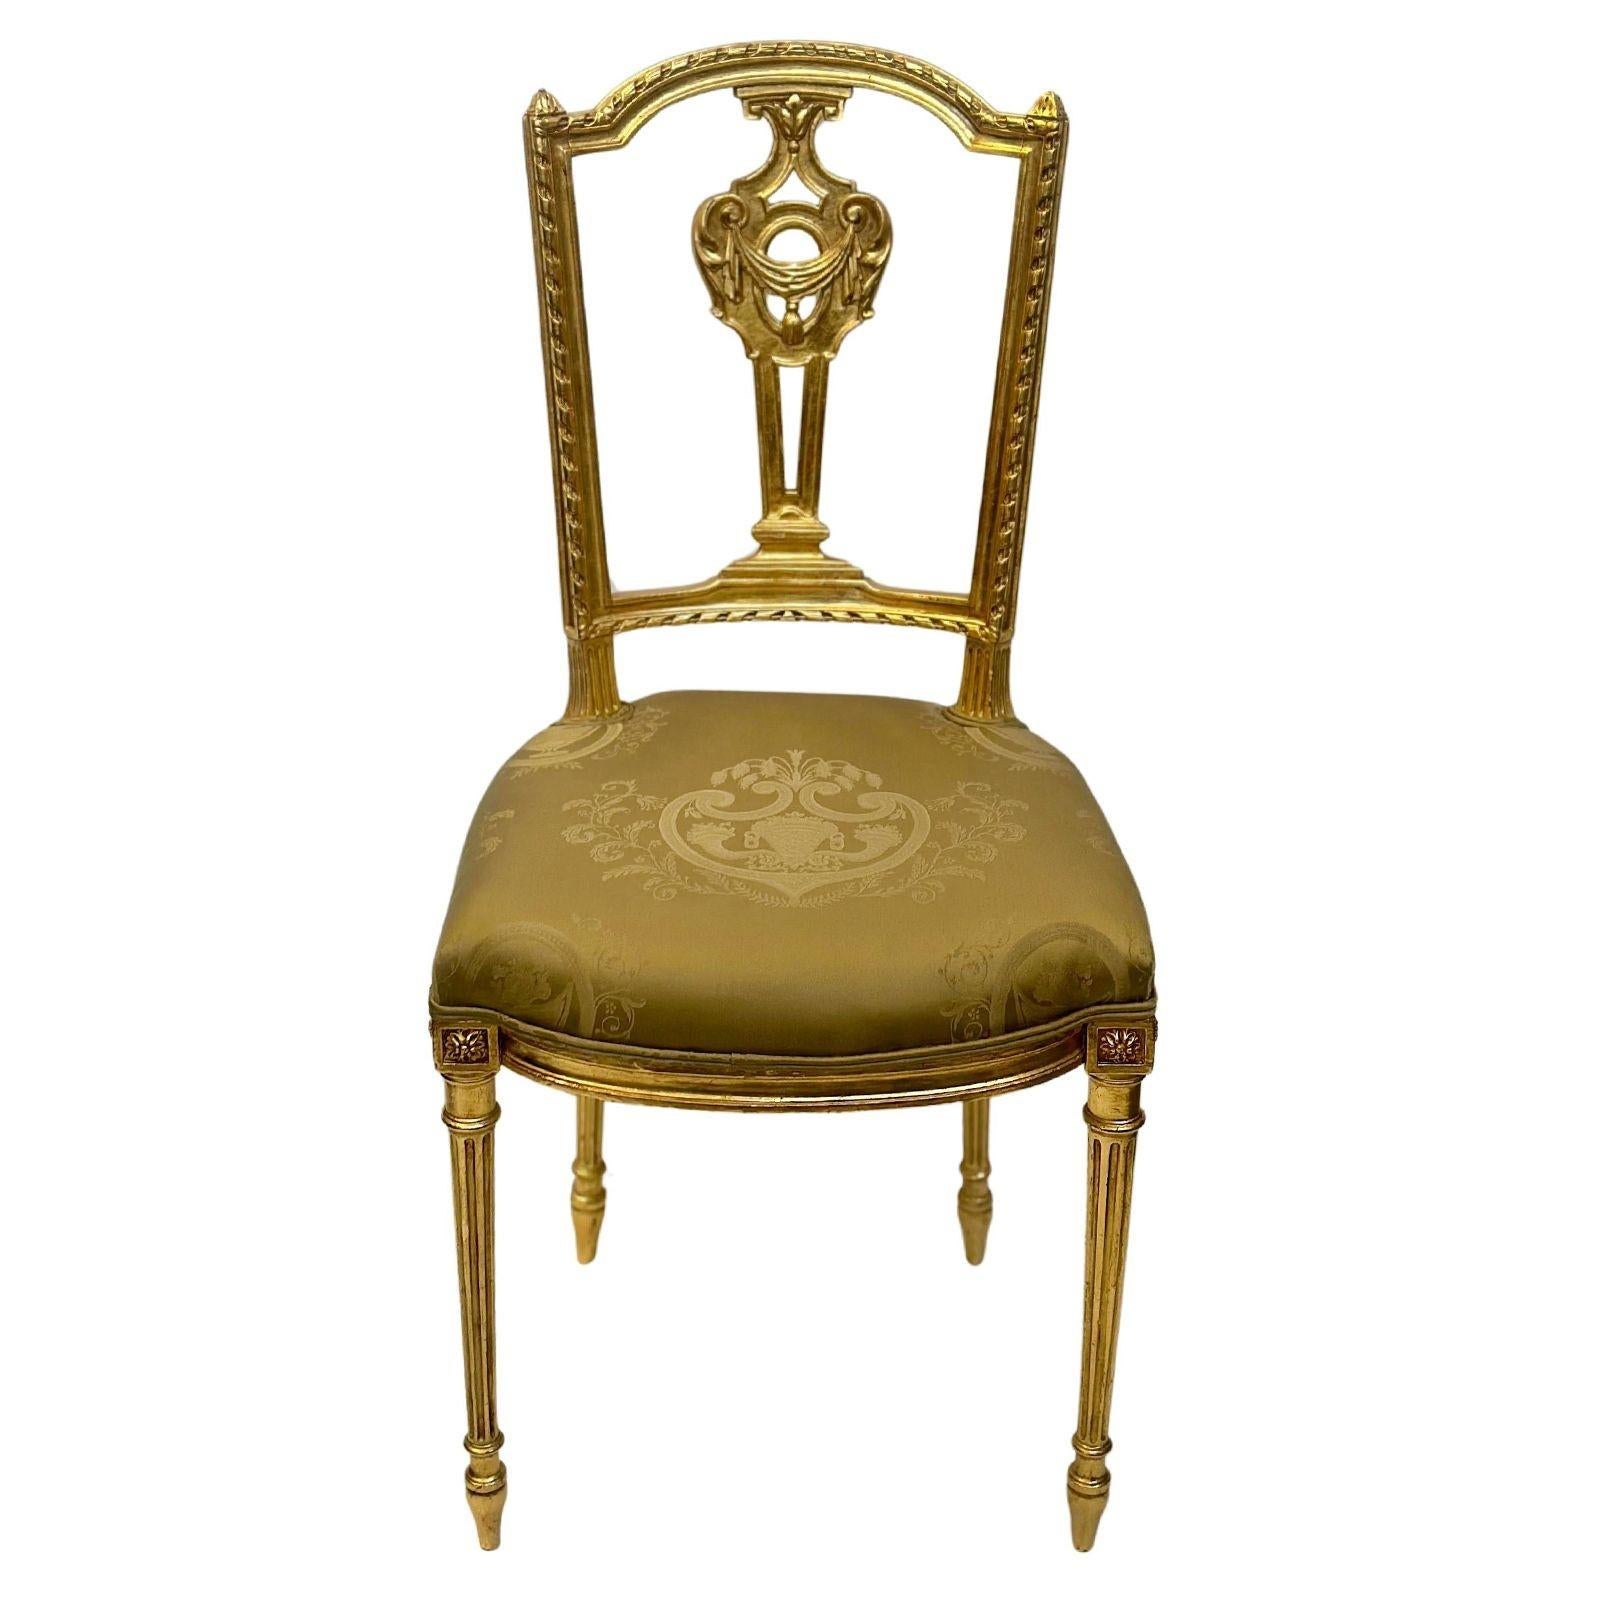 Pair of French carved giltwood accent chairs upholstered with a beautiful olive-tone fabric and gold details. The olive tone upholstery adds a warm and inviting element, complementing the rich gold accents beautifully.
Made in France in the 1910's,